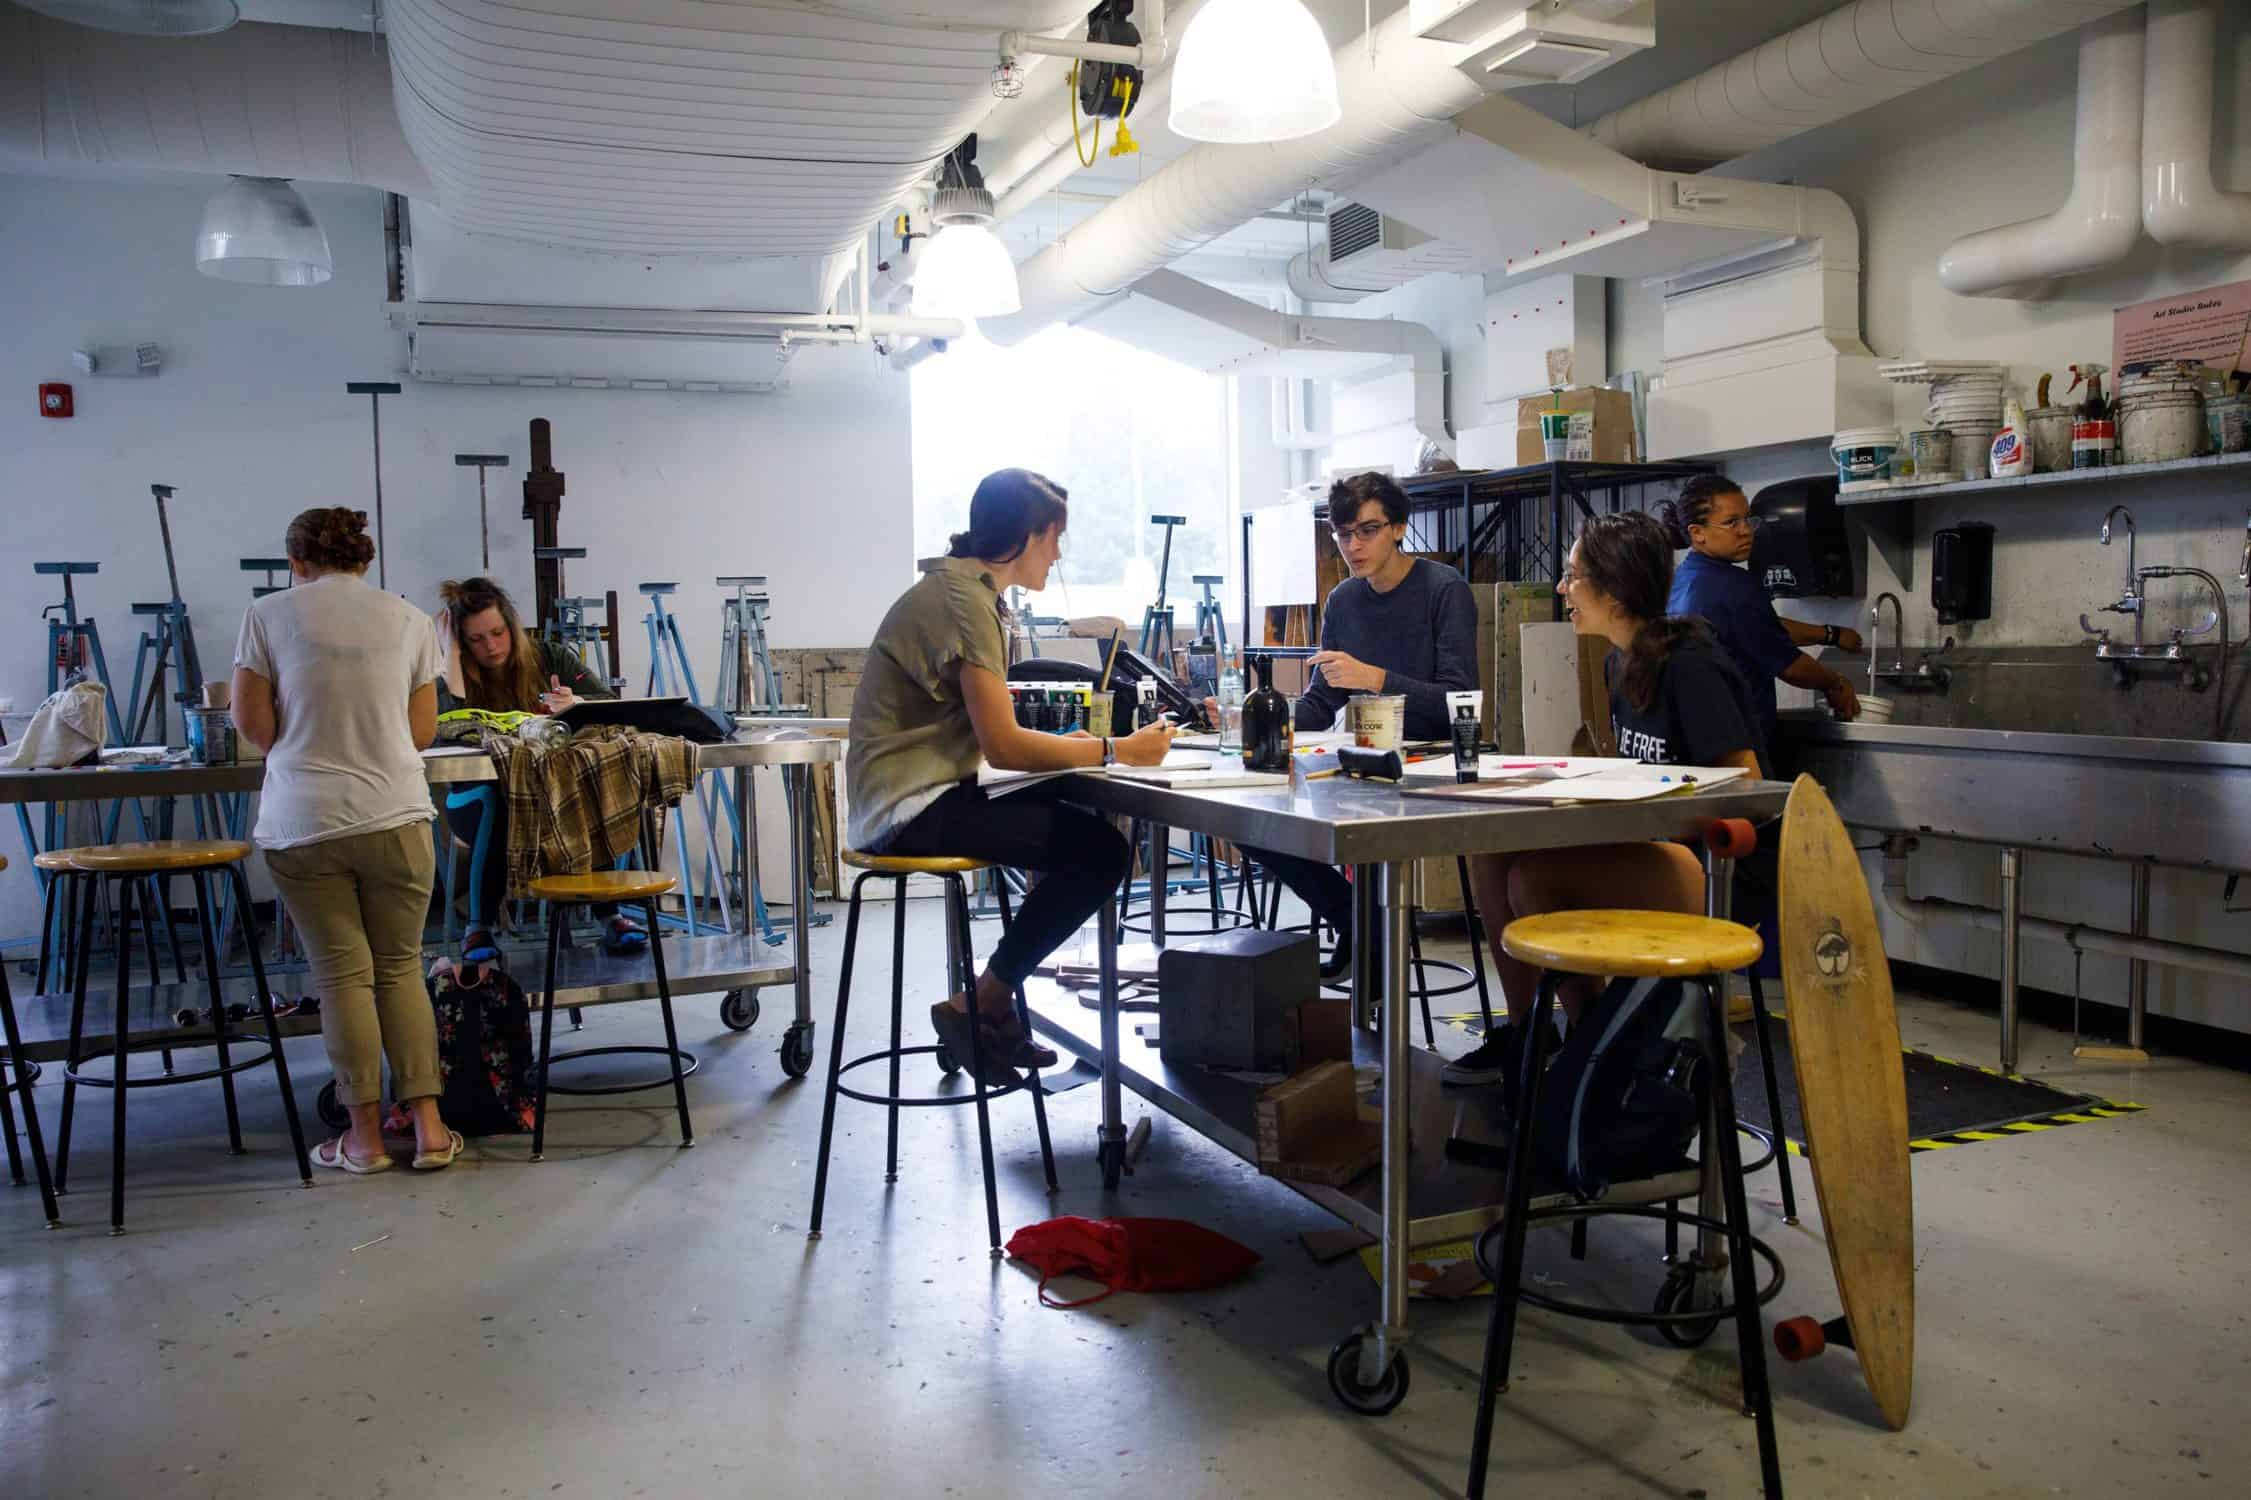 Students sit on stools in an art studio